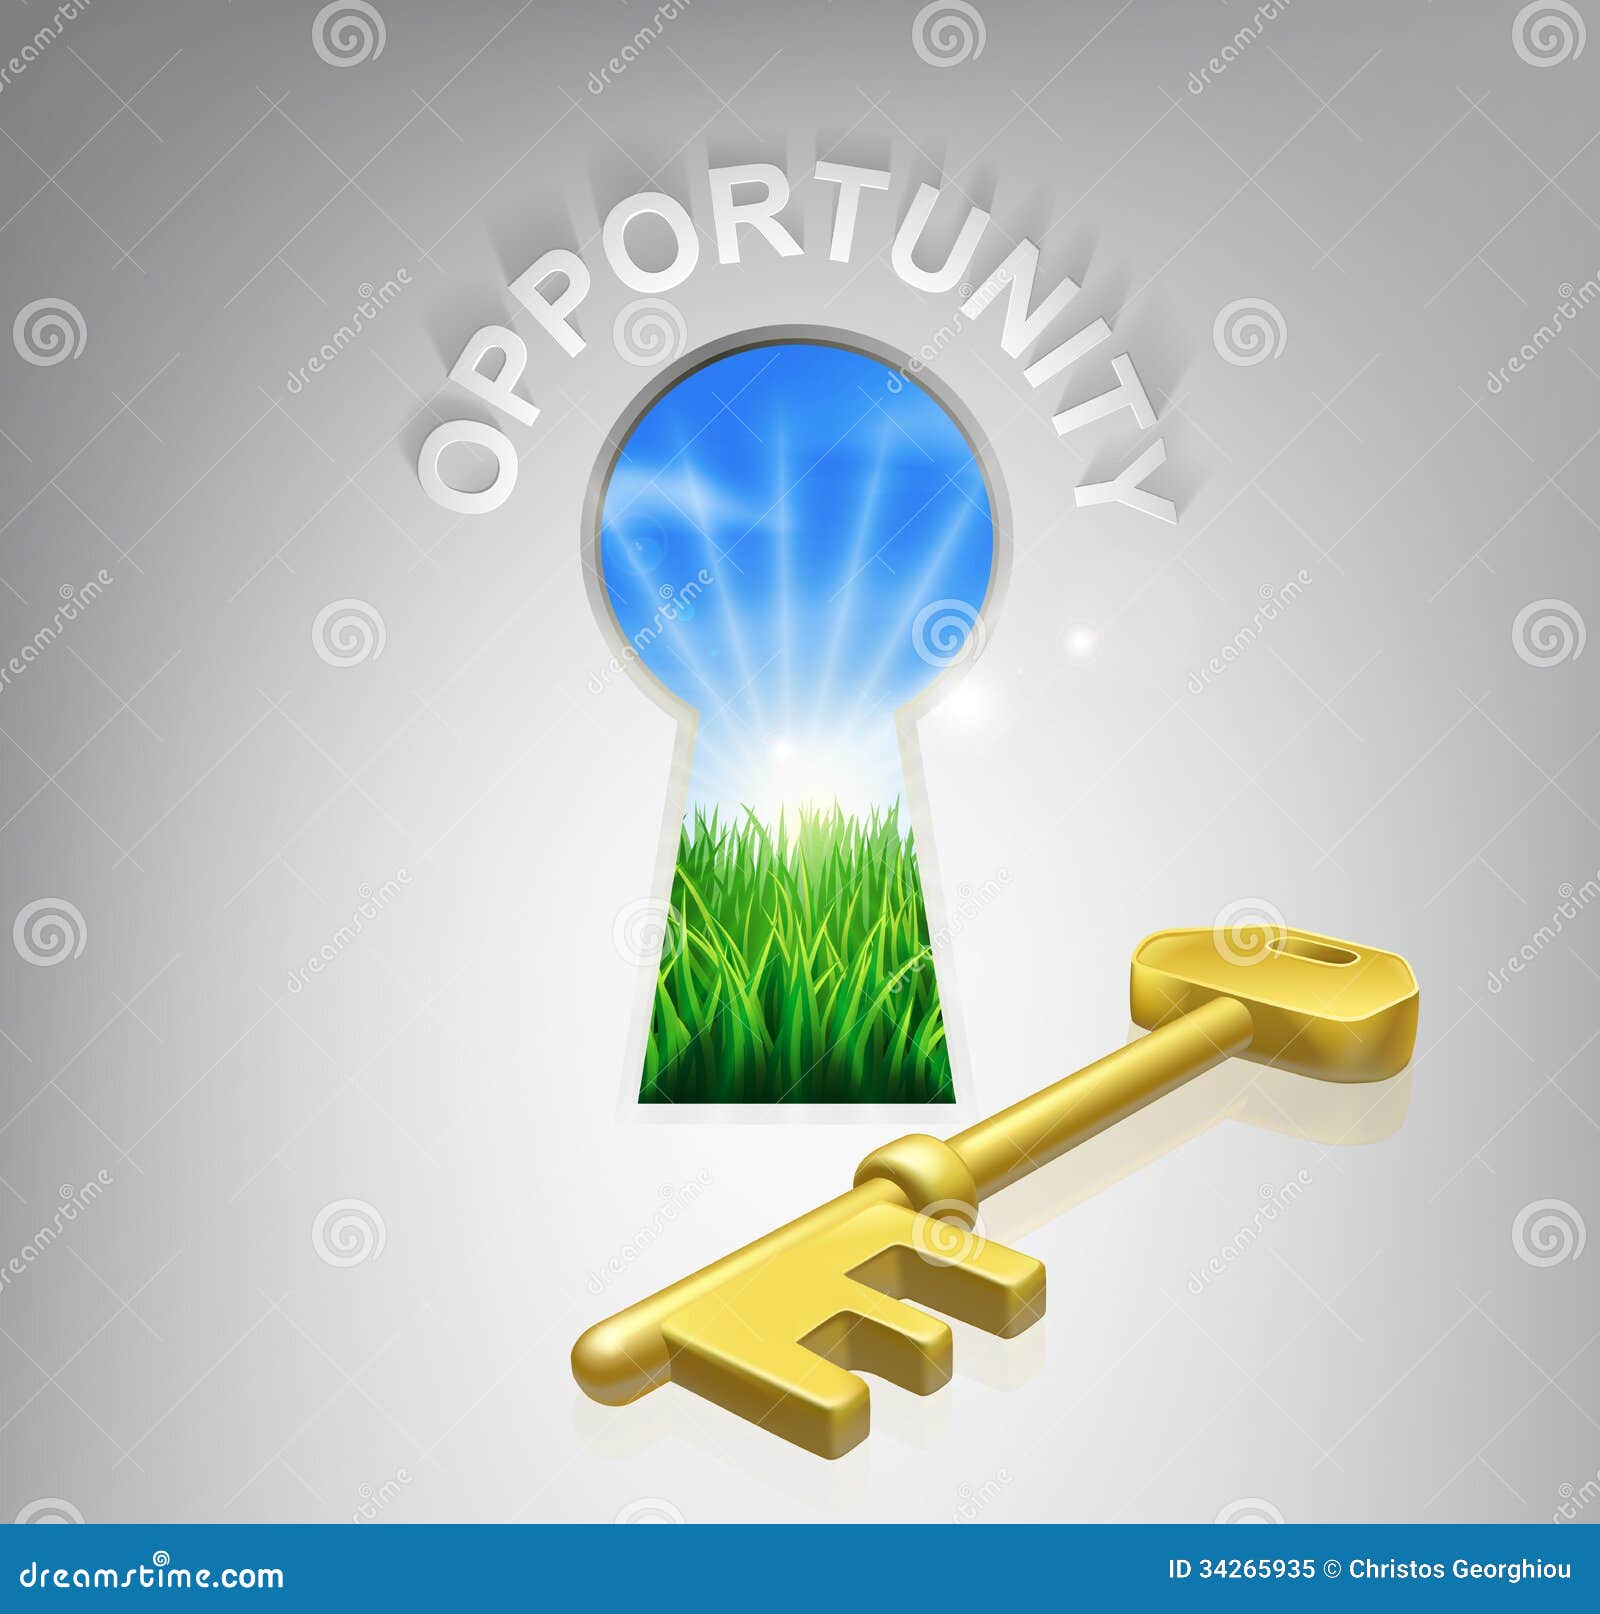 key opportunity concept